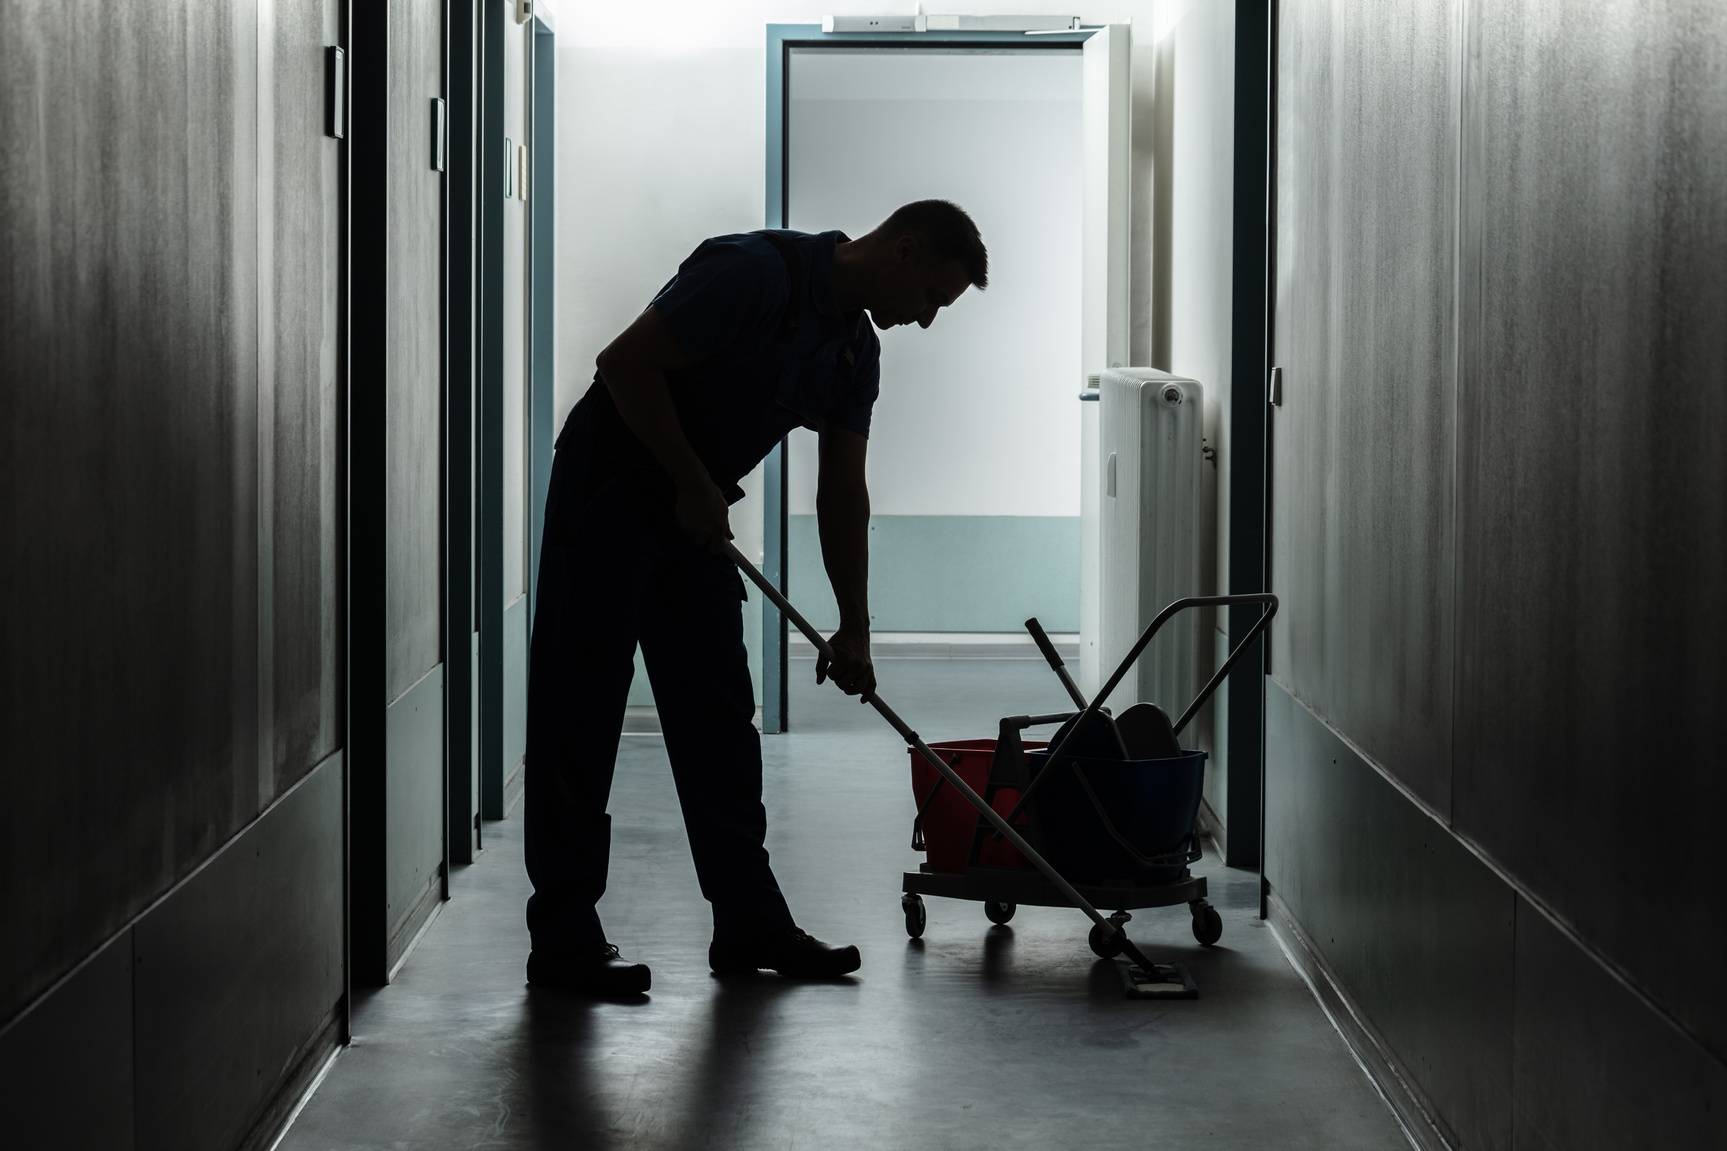 Male Janitor Cleaning Corridor